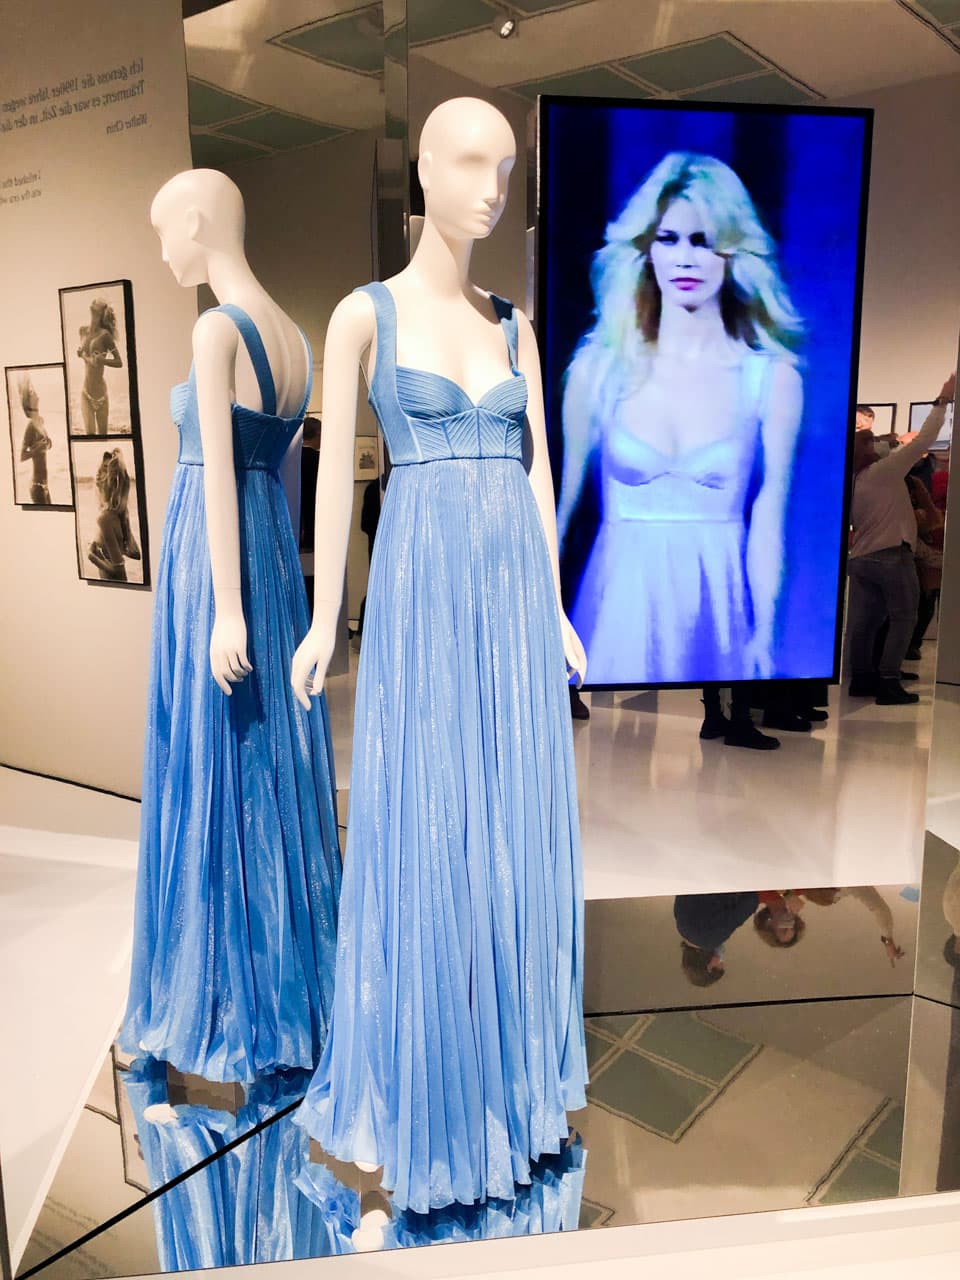 A blue gown worn by Claudia Schiffer at the A/W 1994 Versace show on display at Kunstpalast Museum